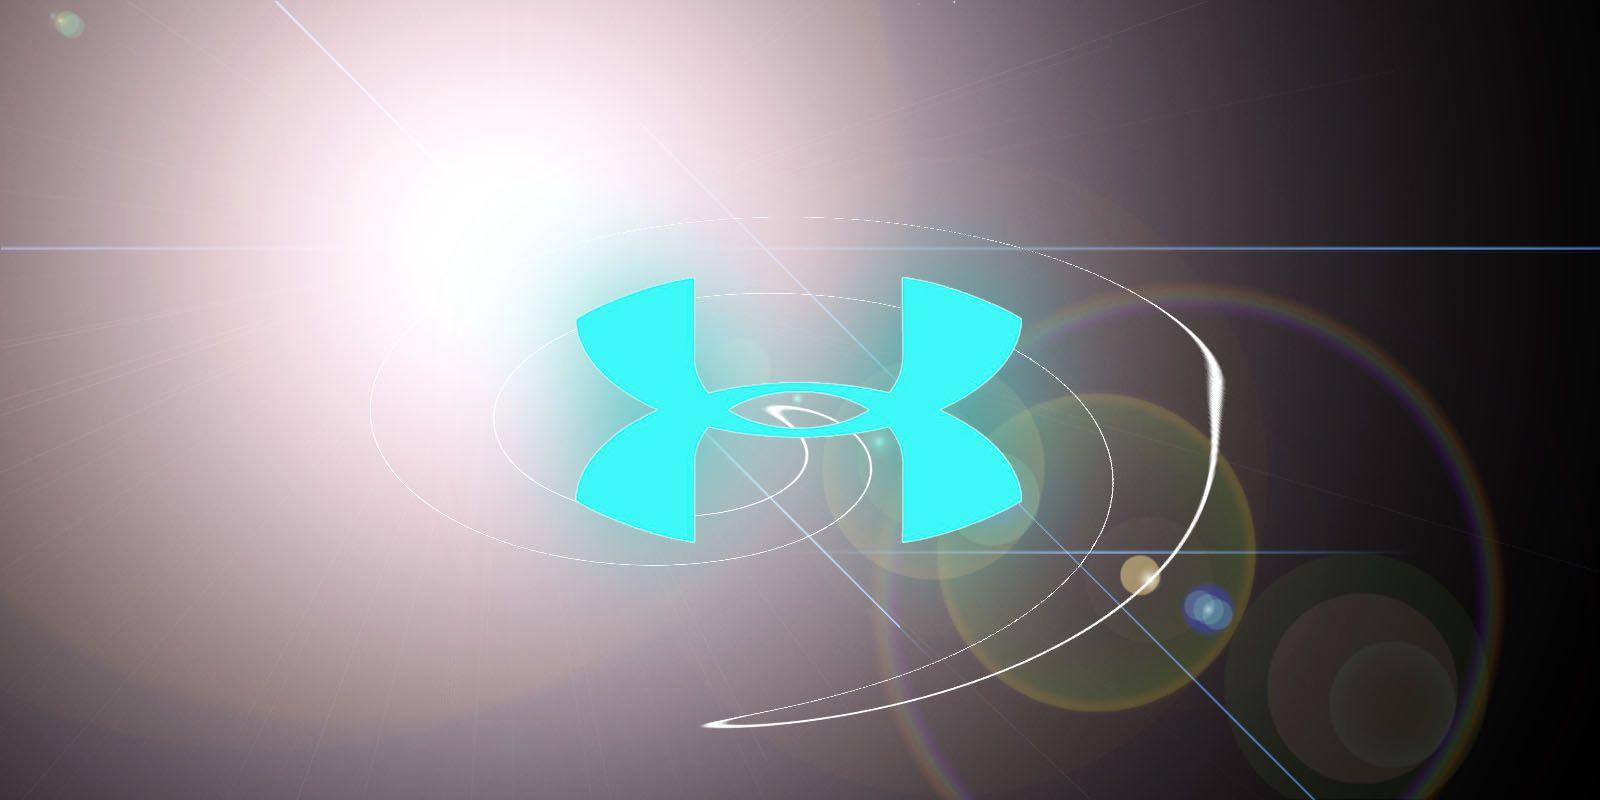 Awesome Under Armour Logo - 1600x800px Cool Under Armour Wallpapers - WallpaperSafari